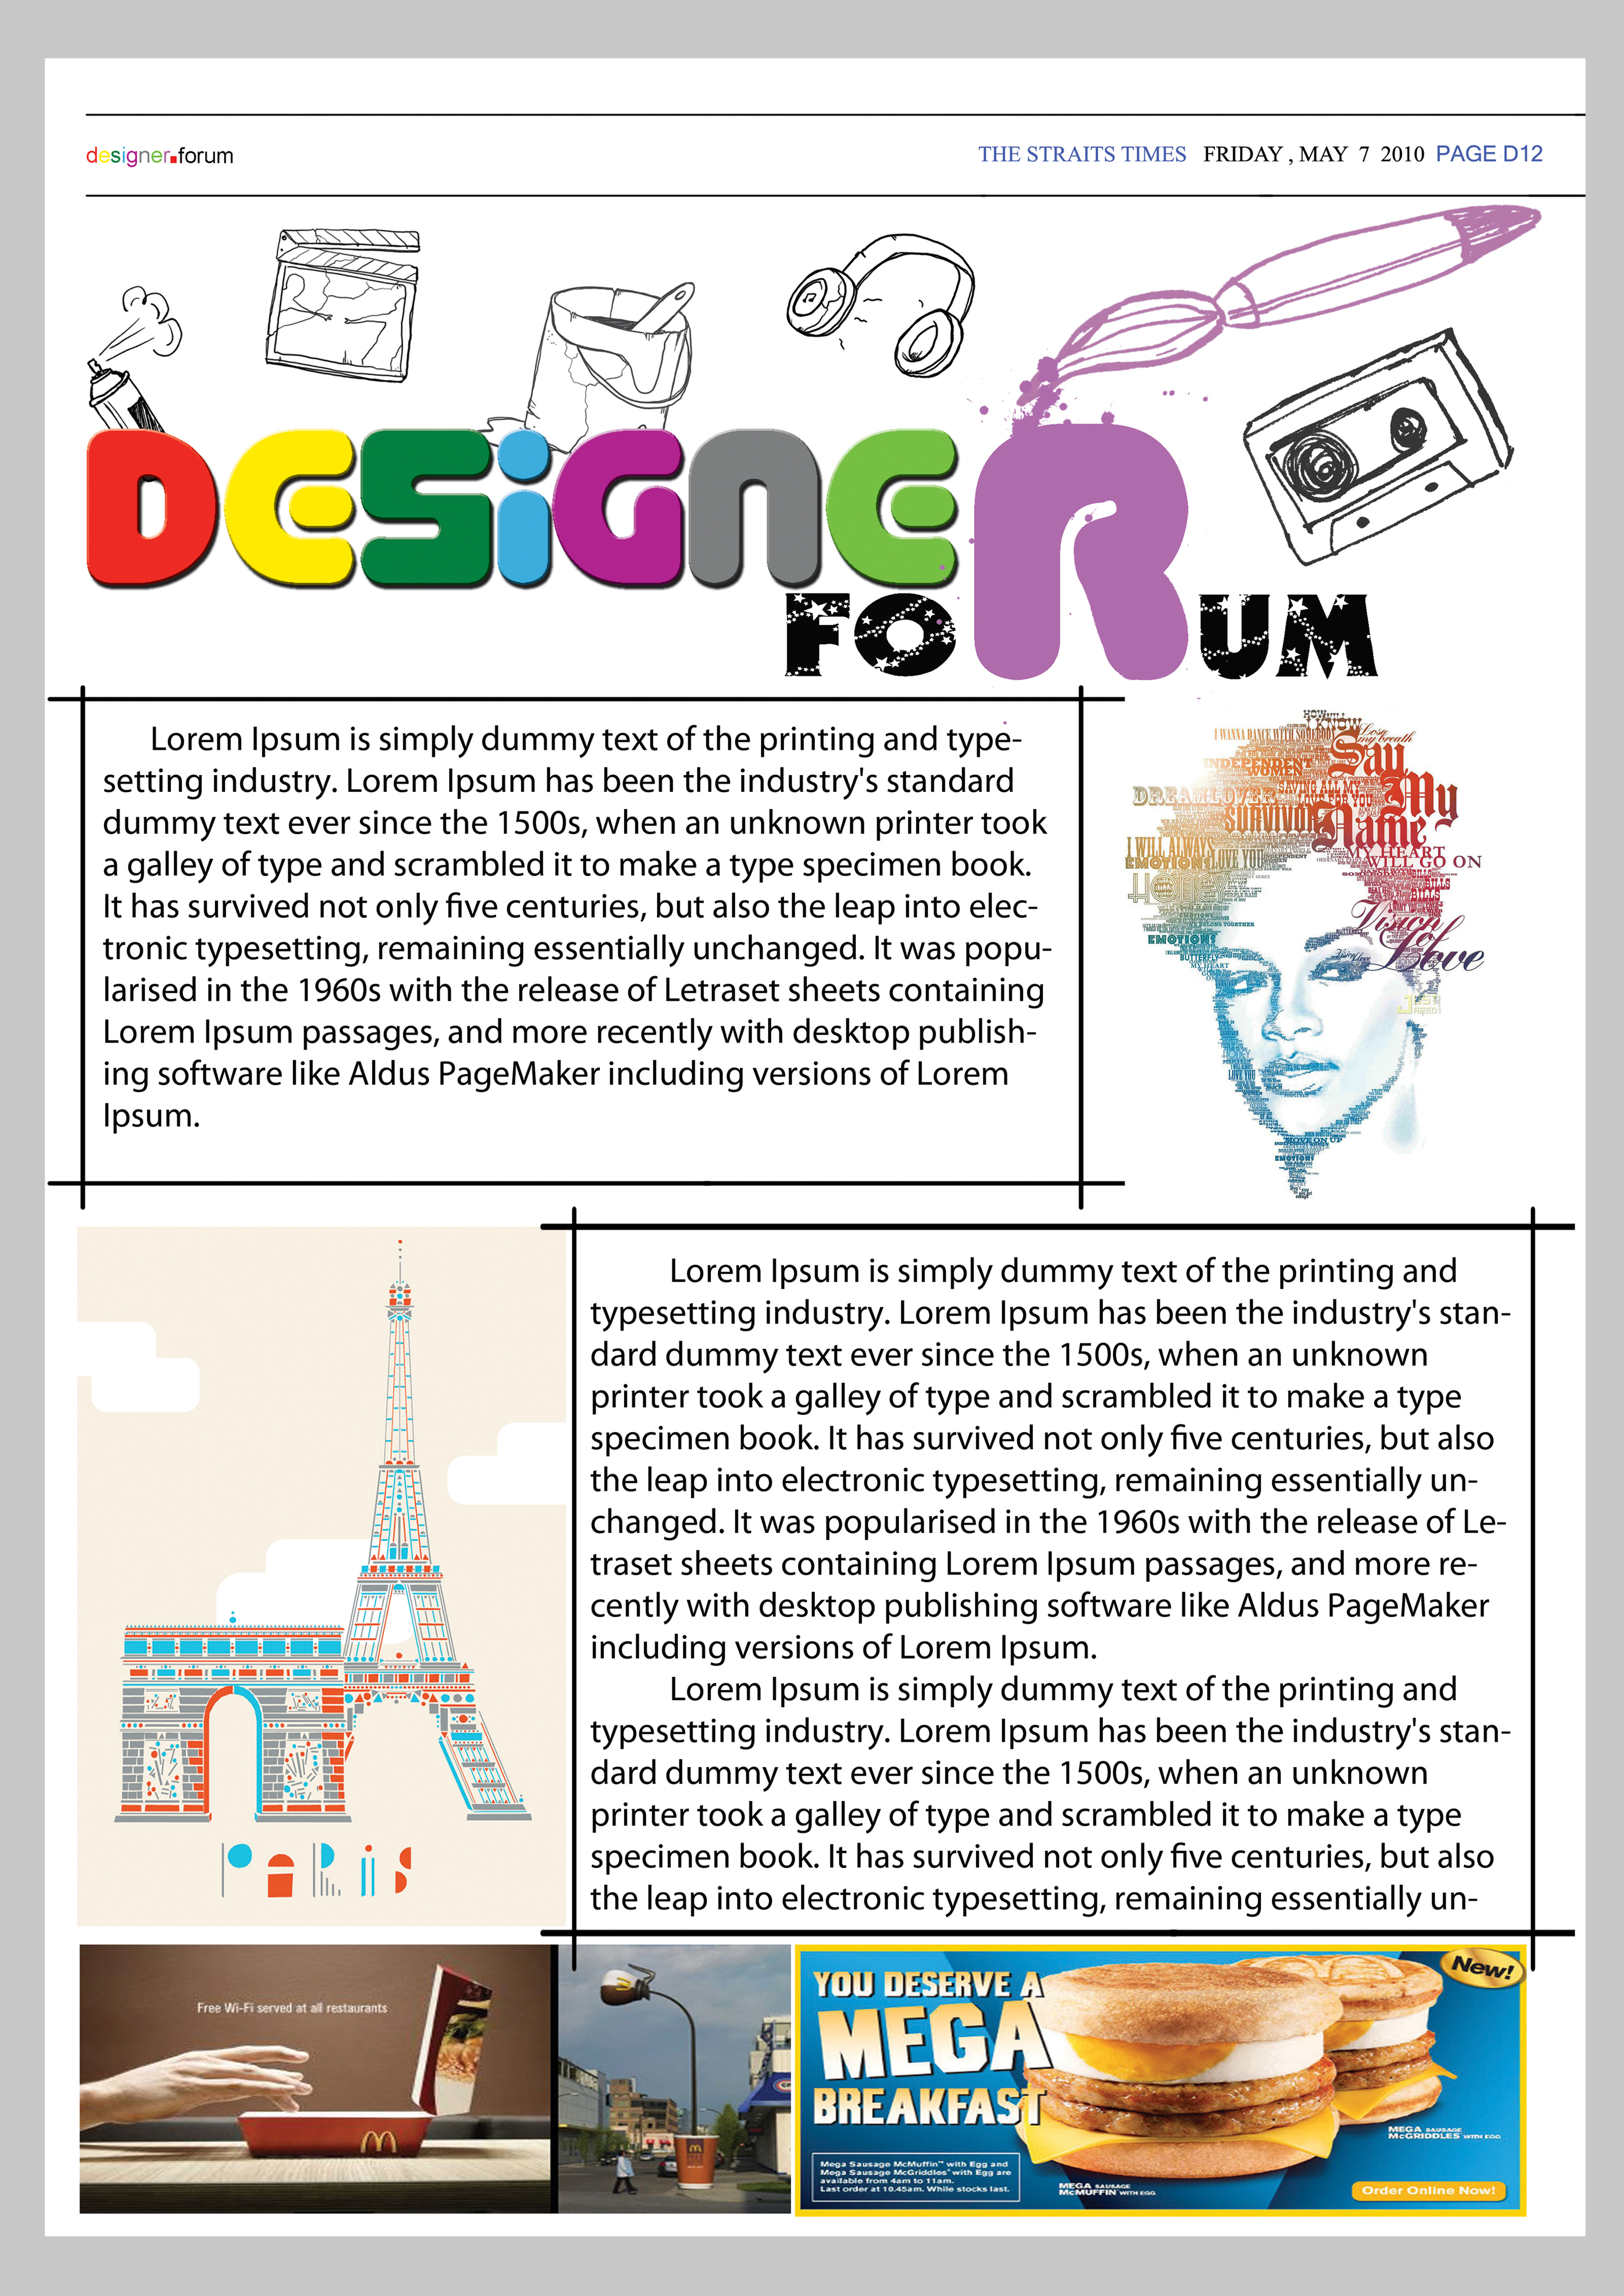 Newspaper Layout And Design